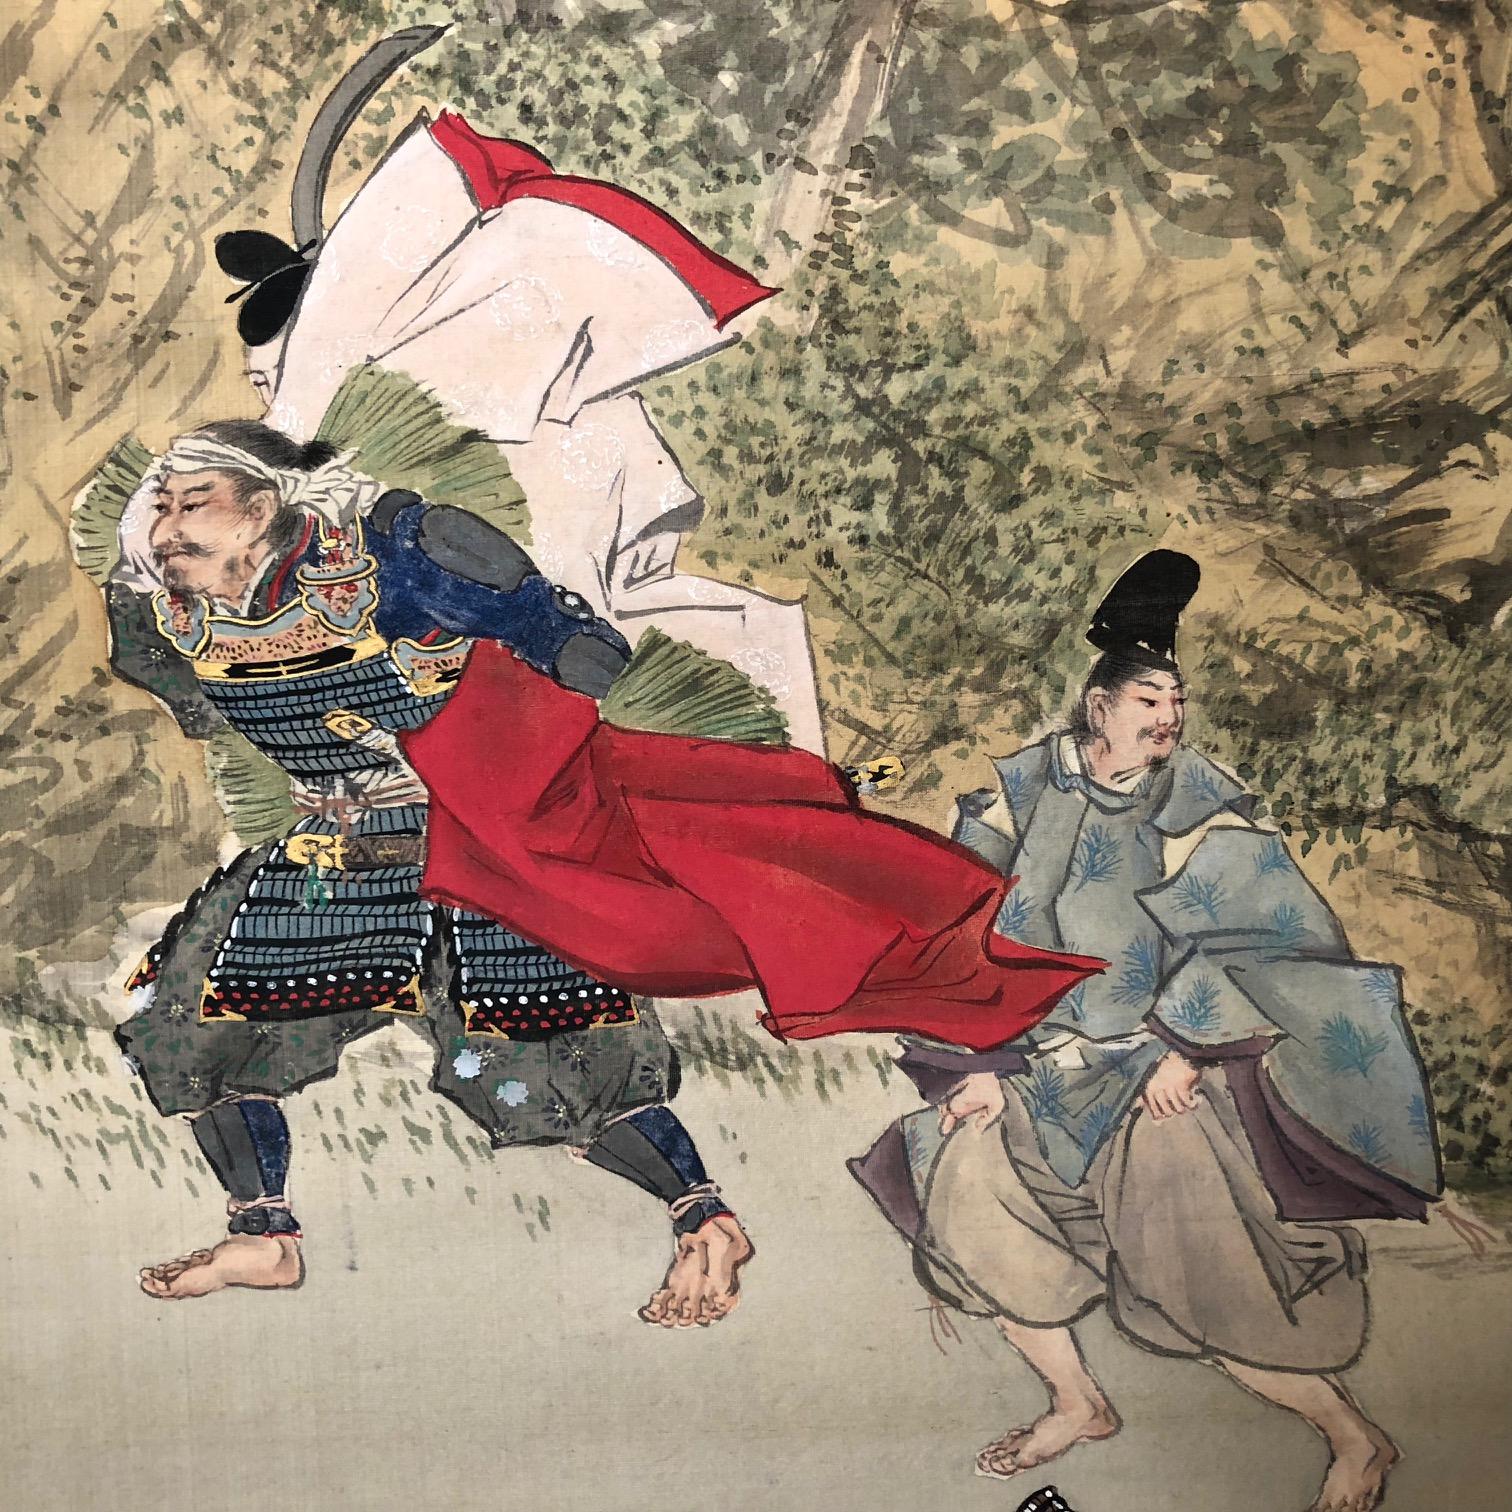 A very fine Japanese antique hand-painted silk scroll of two samurai in summer and dated 1914, Taisho period.
Hand painting in lively colors with great details. , signed.

Inscription:
sanmurai
Reifuu
Taisho 3, (1914), early summer
Bone